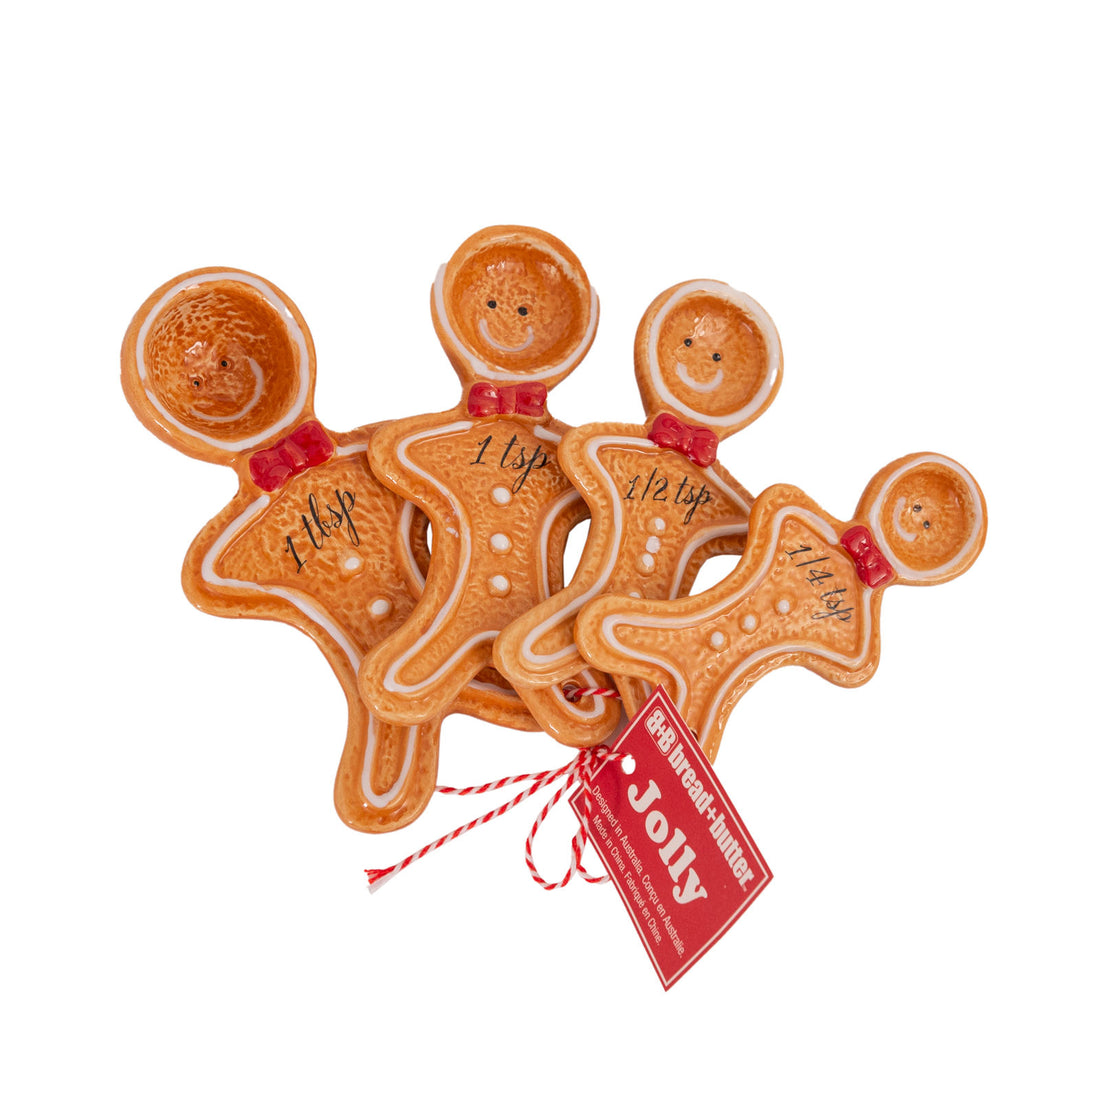 Bread and Butter Figurine Gingerbread Man Spoons 4 Pack-Decorations-PEROZ Accessories